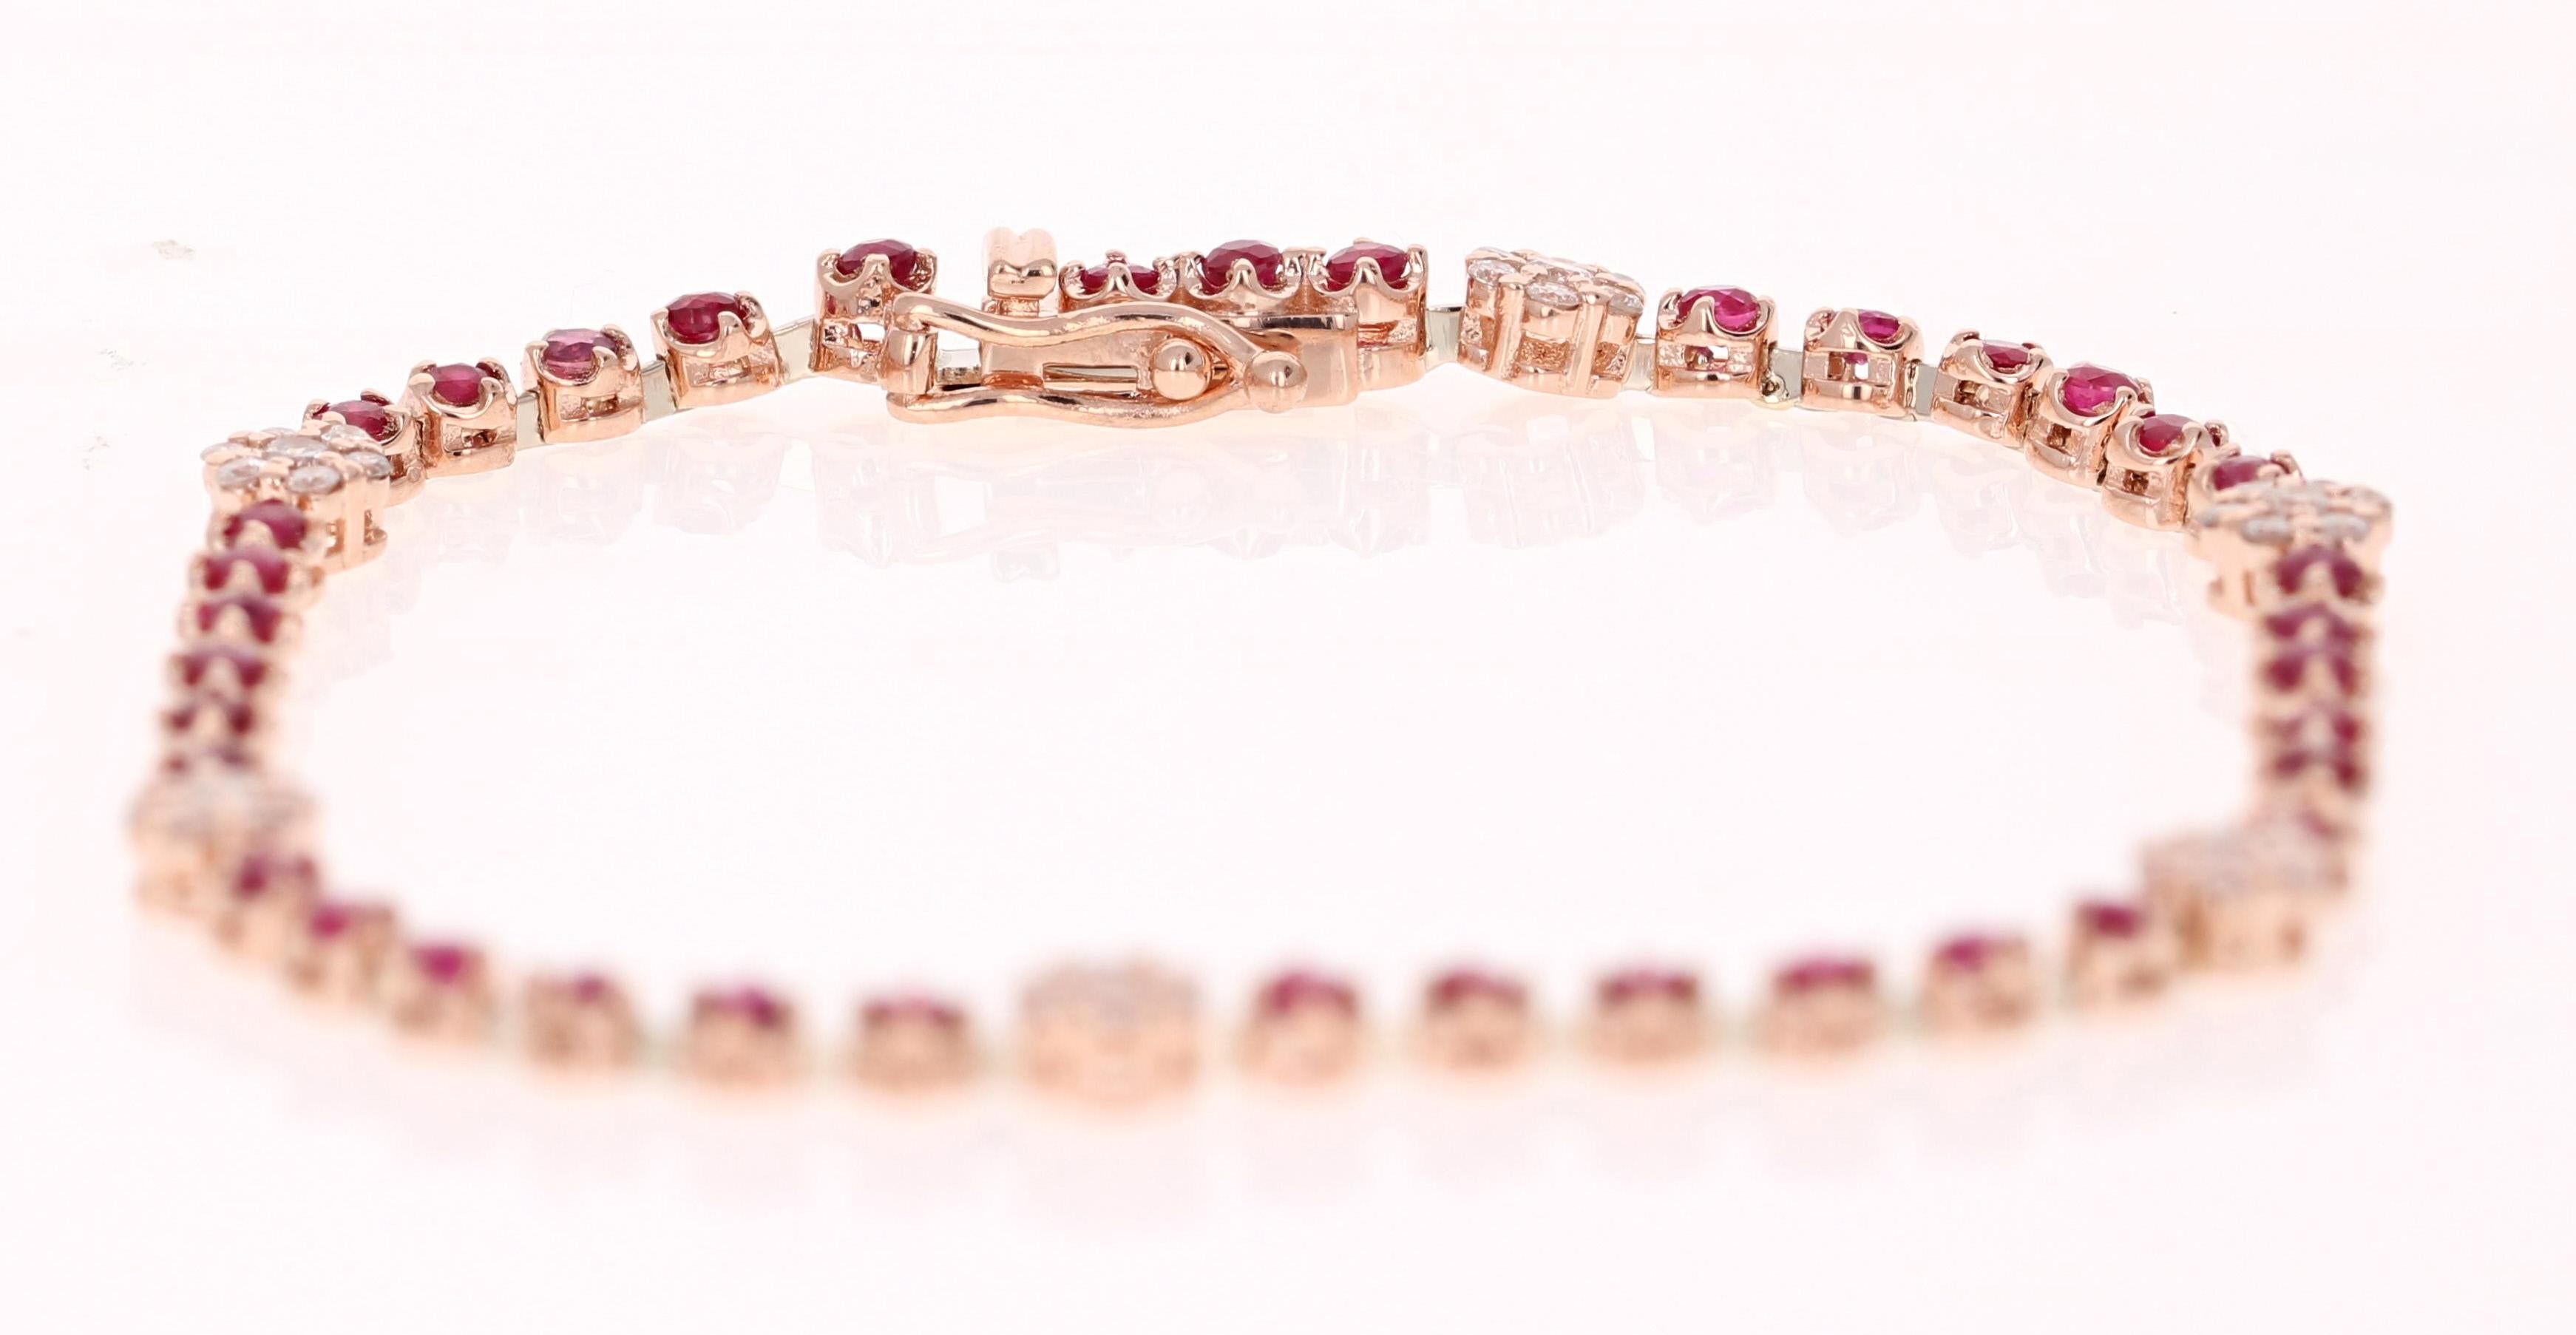 Dainty, Delicate, and Beautiful. 
A 14K Rose Gold Ruby and Diamond Bracelet with a flower design. 

The 38 Round Cut Rubies are 1.85 carats and the 42 Round Cut Diamonds are 0.60 carats, with a total carat weight of 2.45 carats. 

It has a gold gram